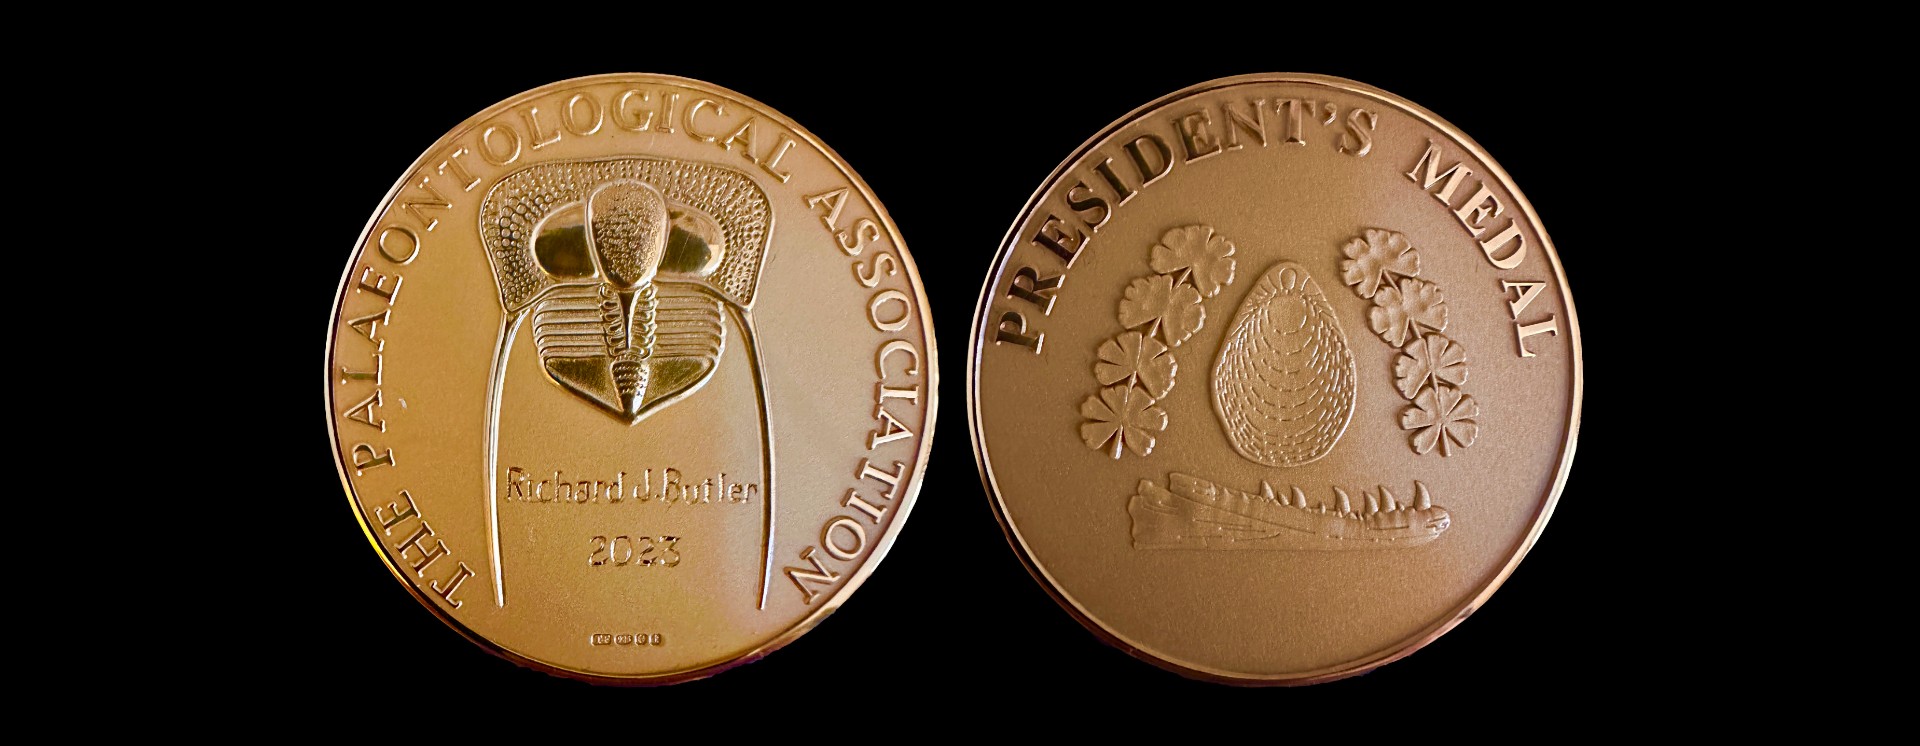 Both sides of a round gold-coloured medal from the Palaeontological Association